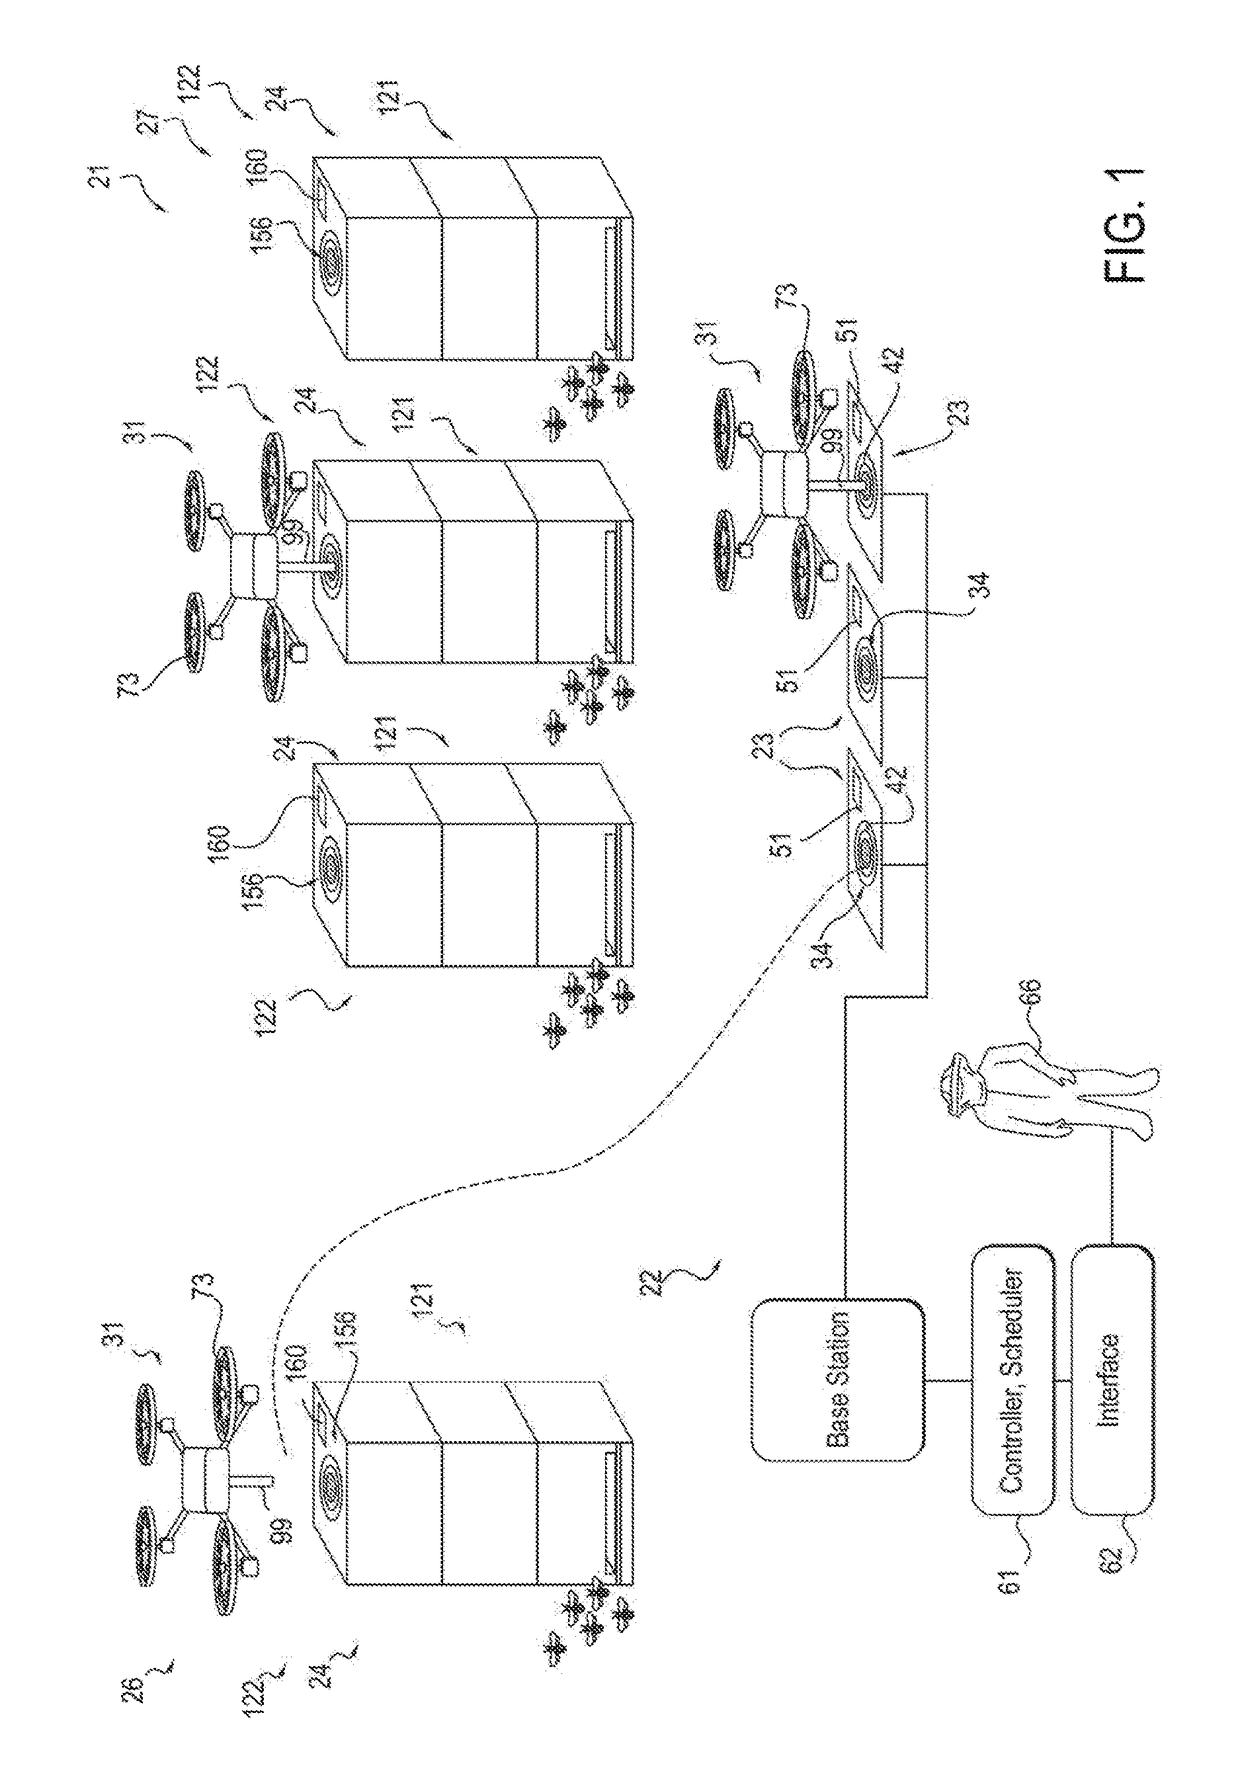 Unmanned aerial vehicle liquid transport, method and system using same